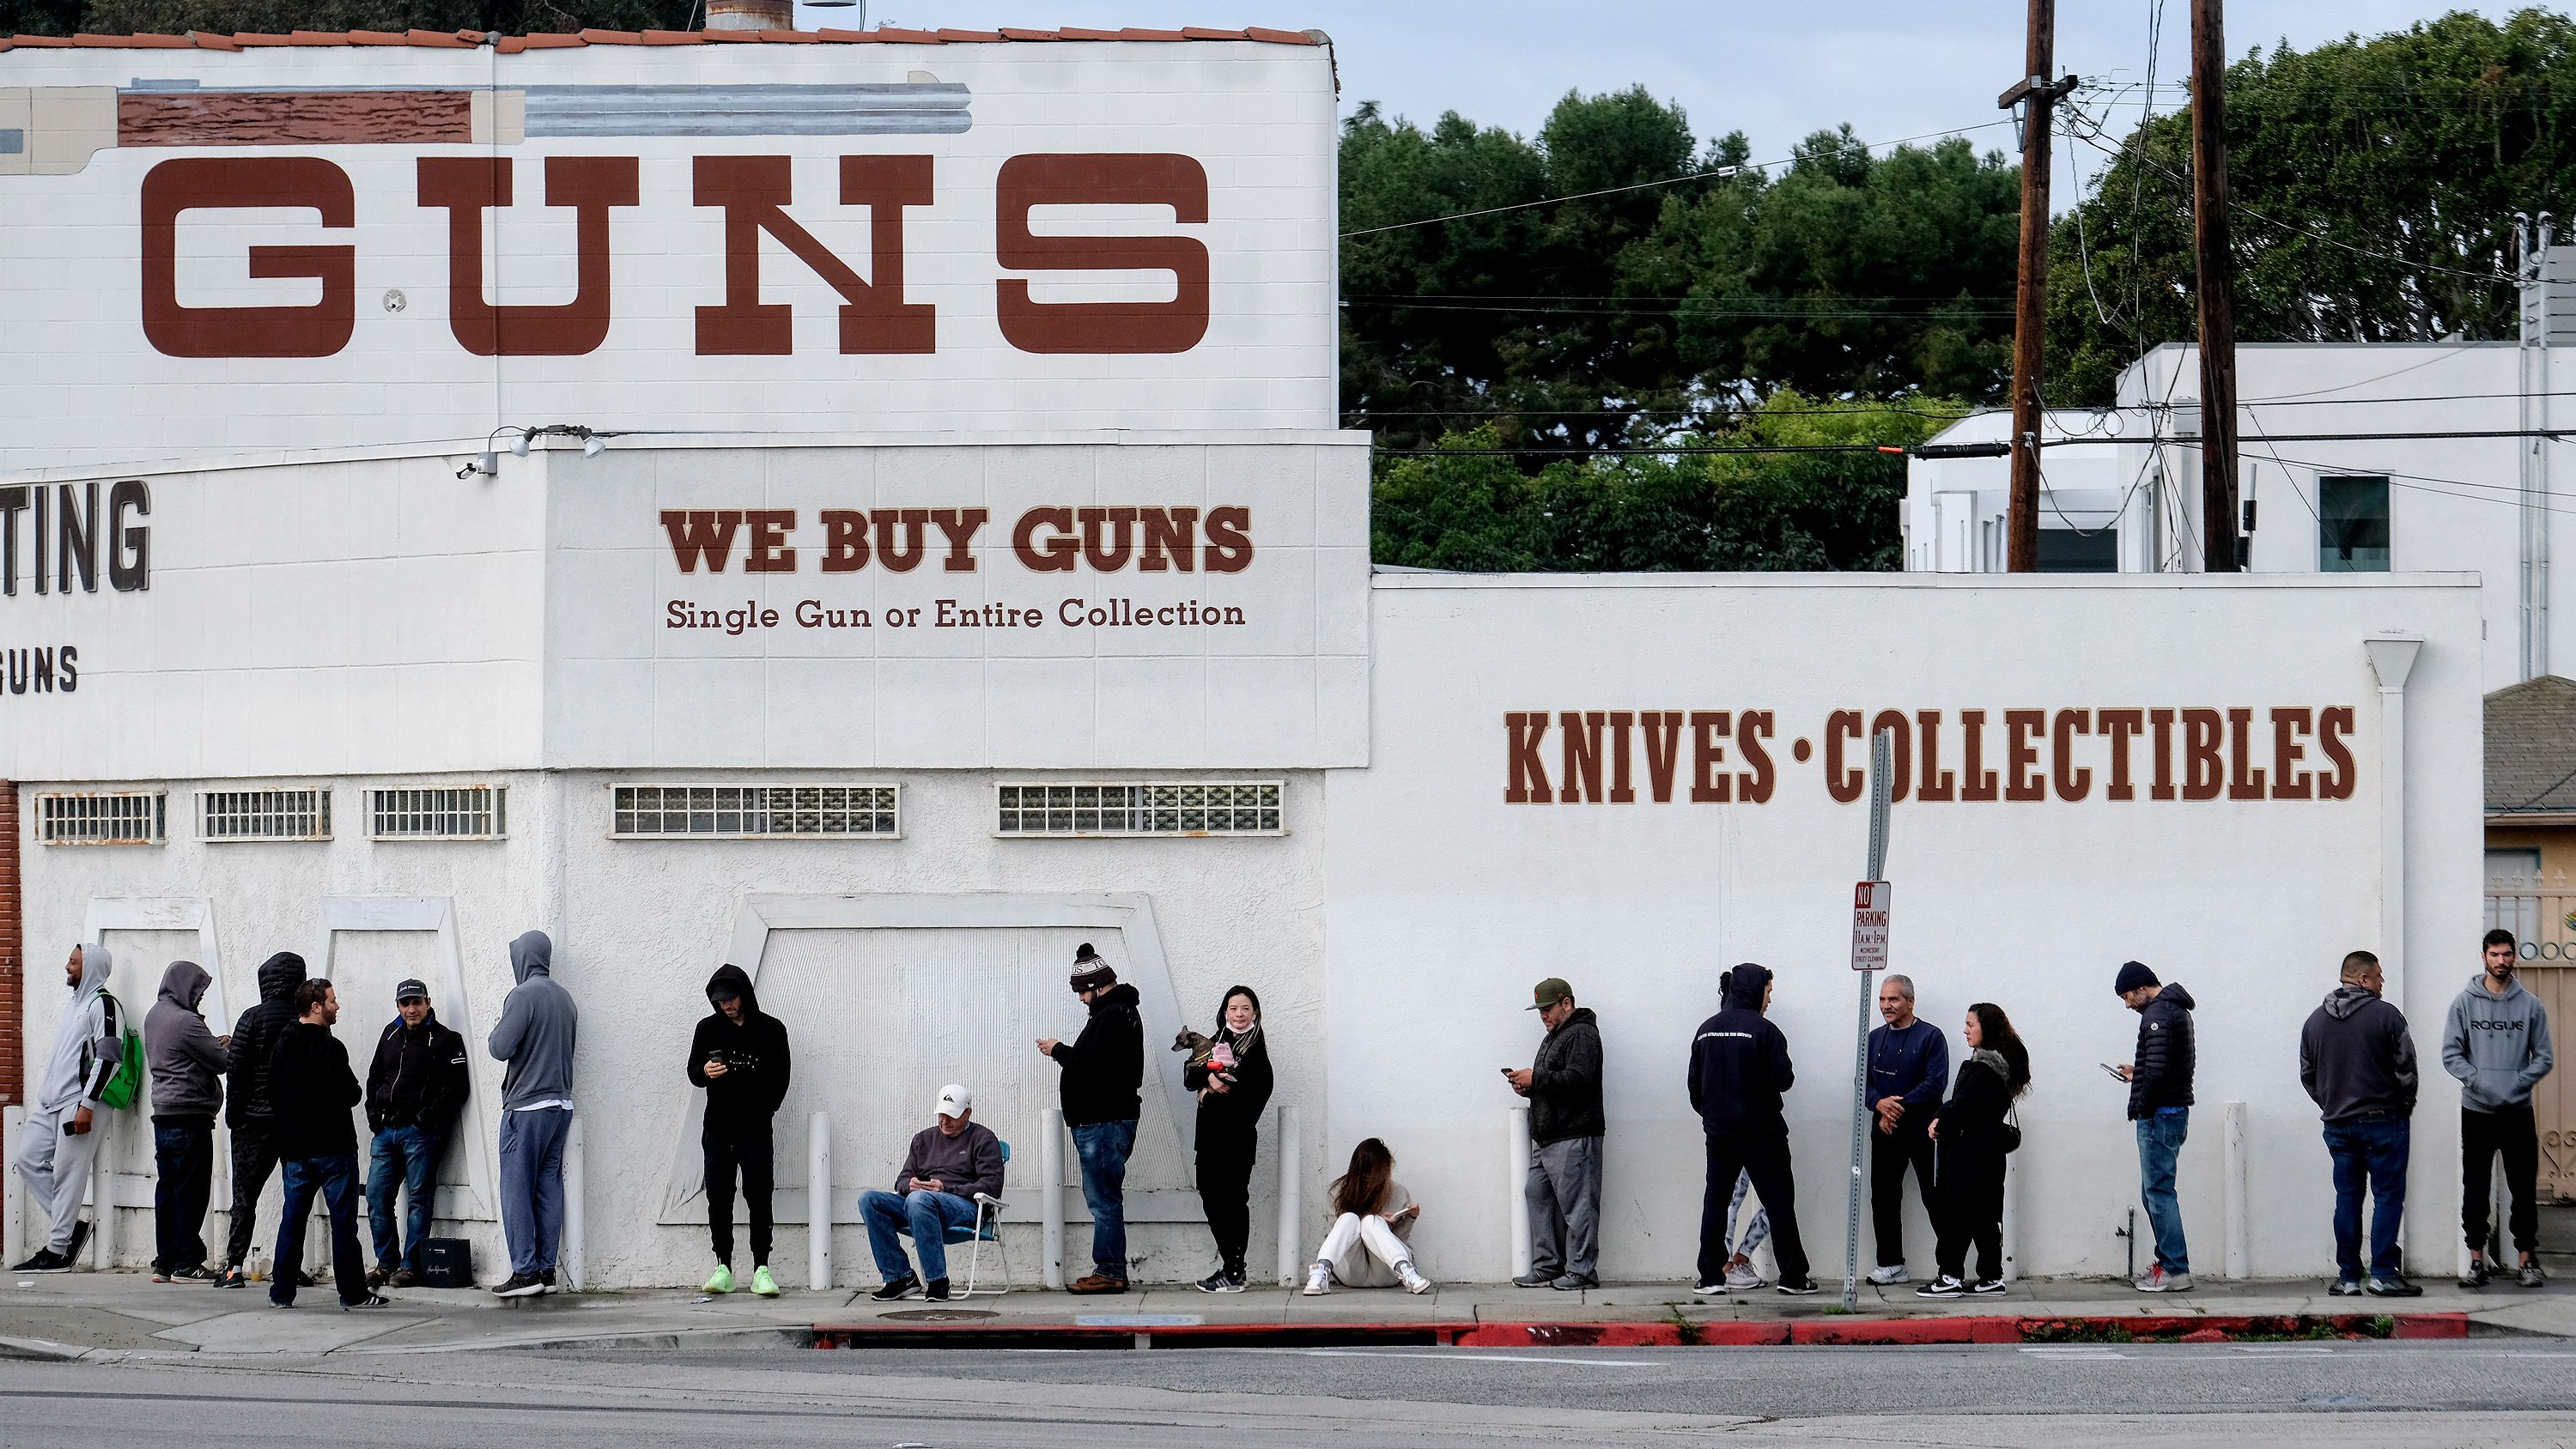 People wait in a line to enter a gun store in Culver City, Calif., Sunday, March 15, 2020. Coronavirus concerns have led to consumer panic buying of grocery staples and now gun stores are seeing a similar run on weapons and ammunition as panic intensifies.